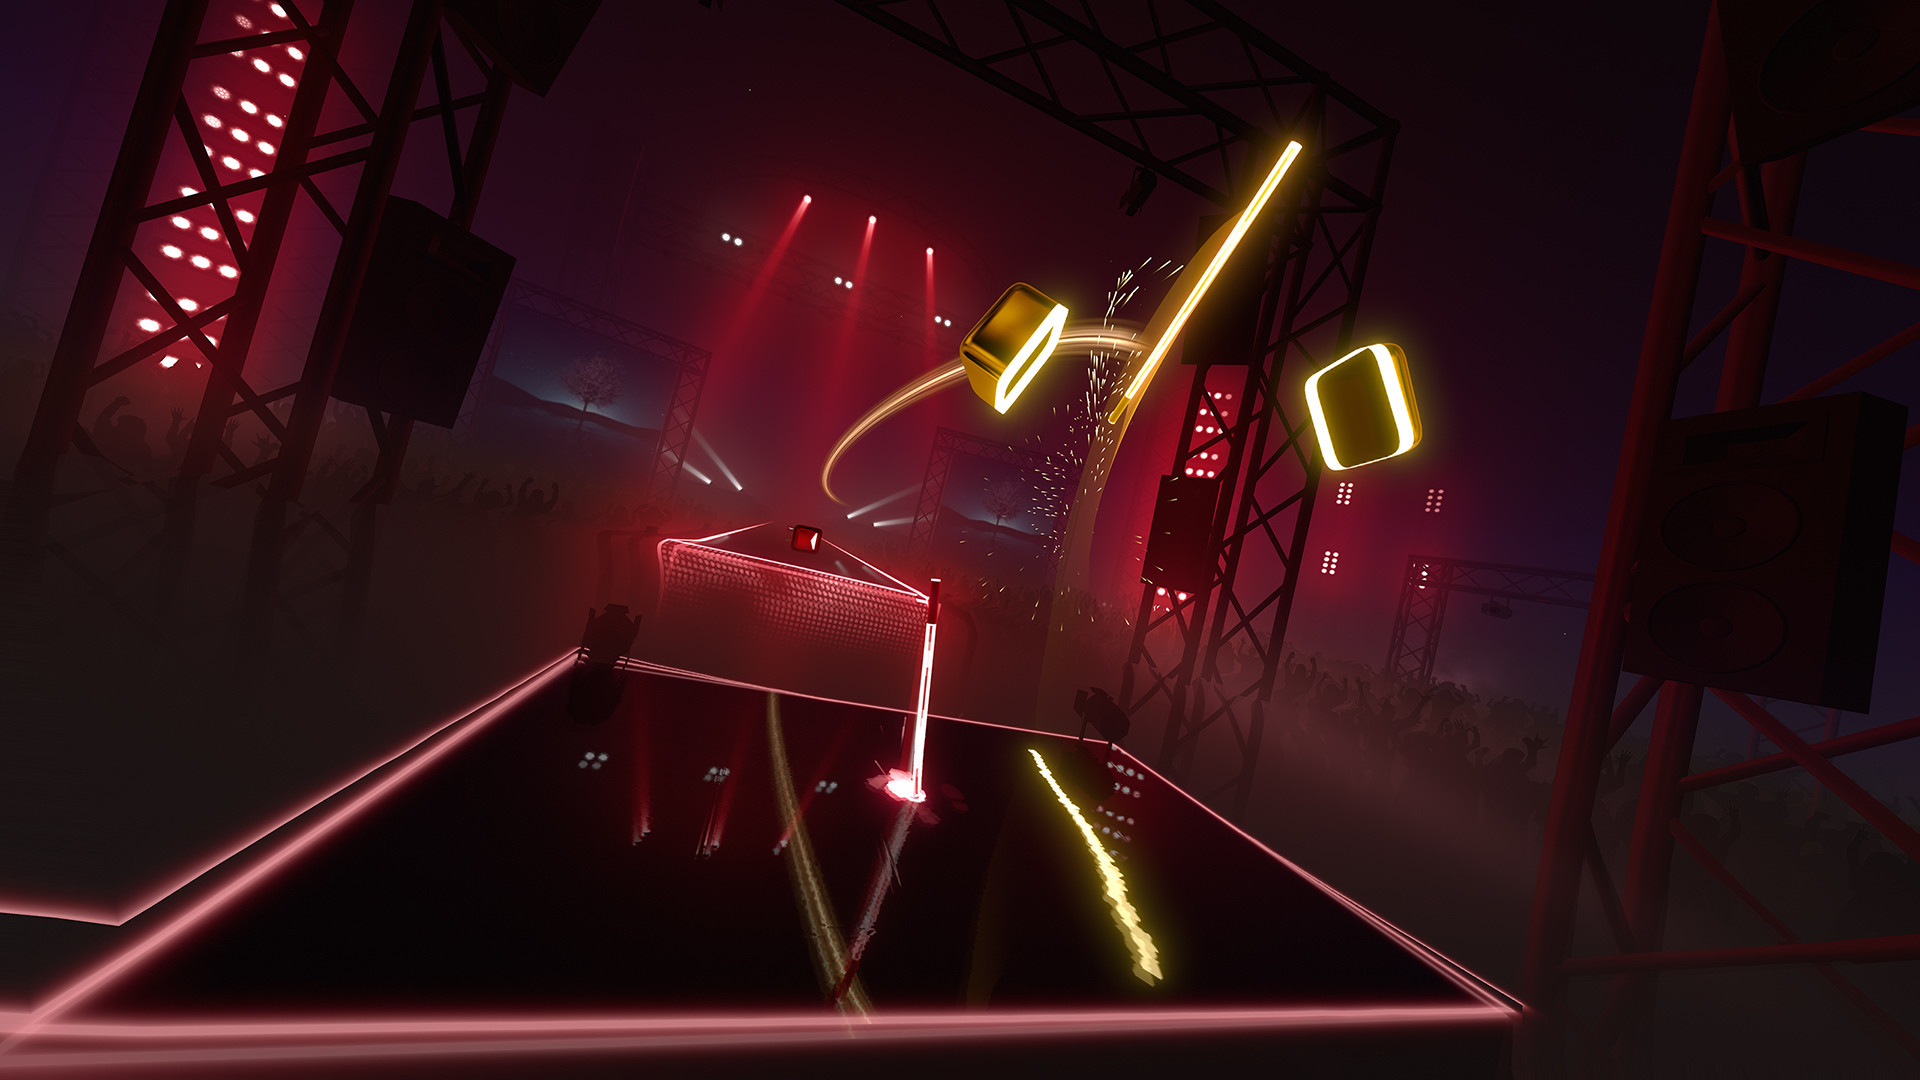 Attention game. Скриншоты Beat saber. Attention игра. :North Memphis стим дополнение к игре Beat saber. Beat saber Fall out boy Dance.